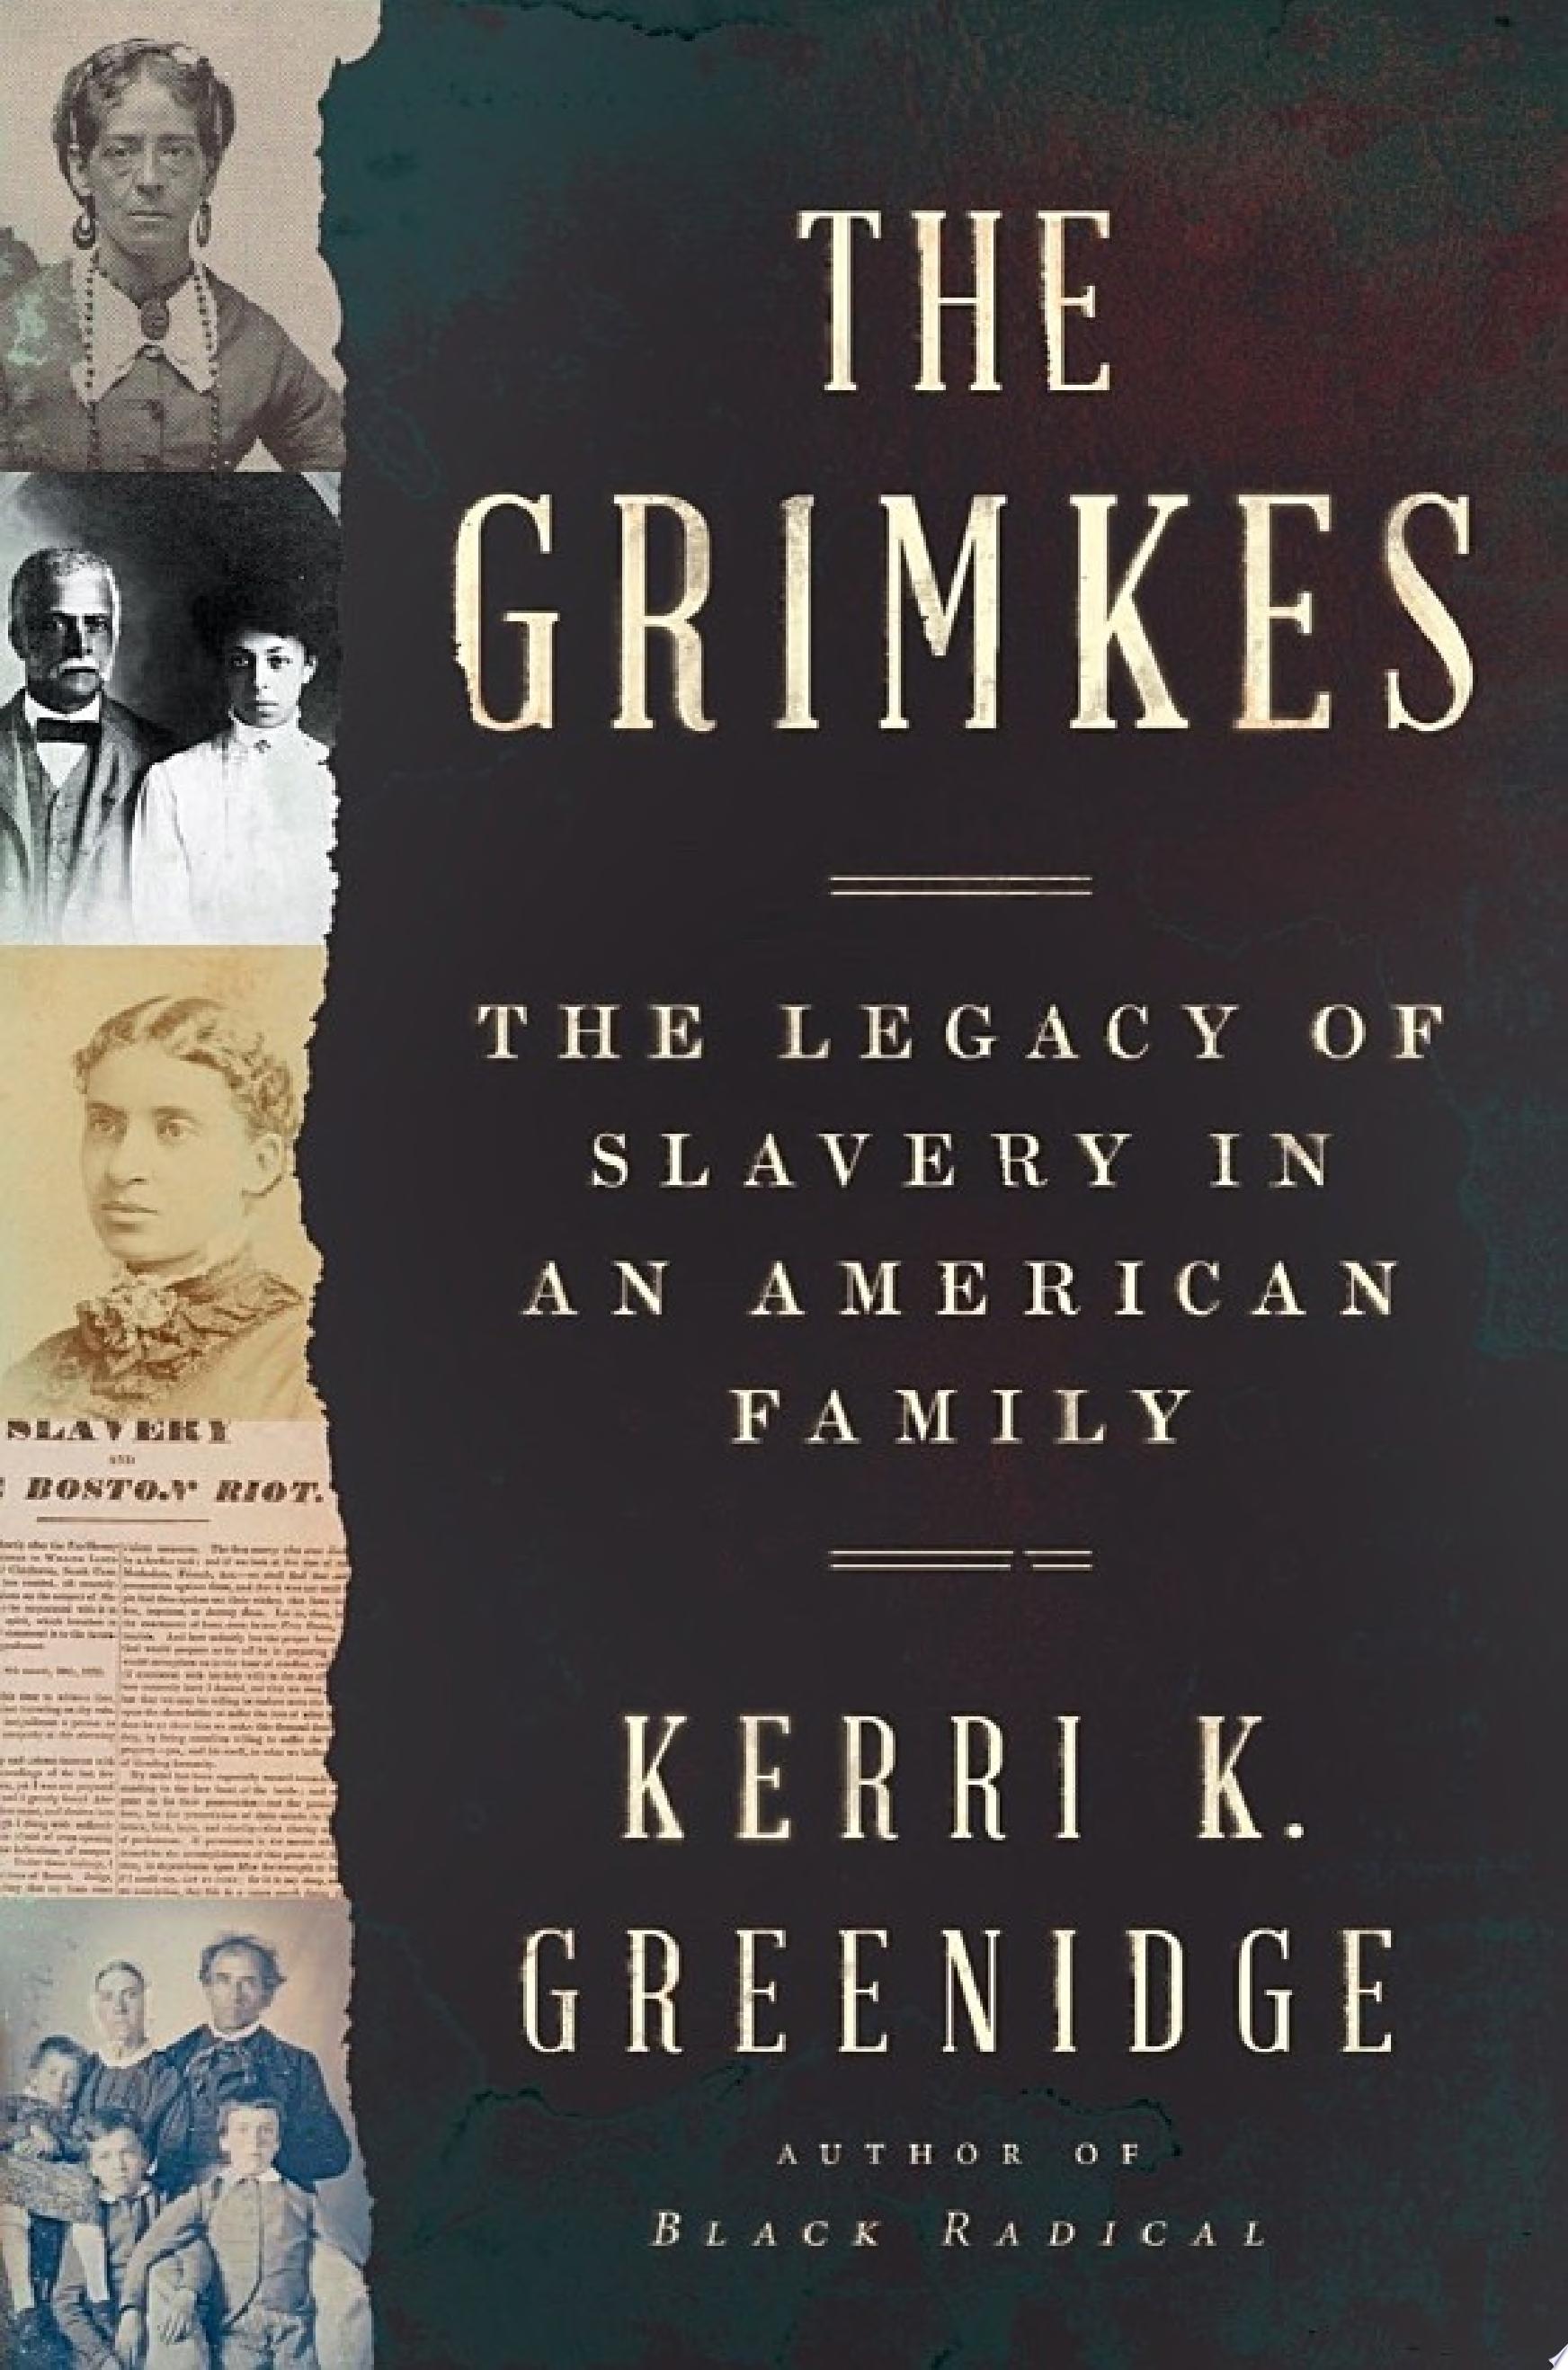 Image for "The Grimkes: The Legacy of Slavery in an American Family"